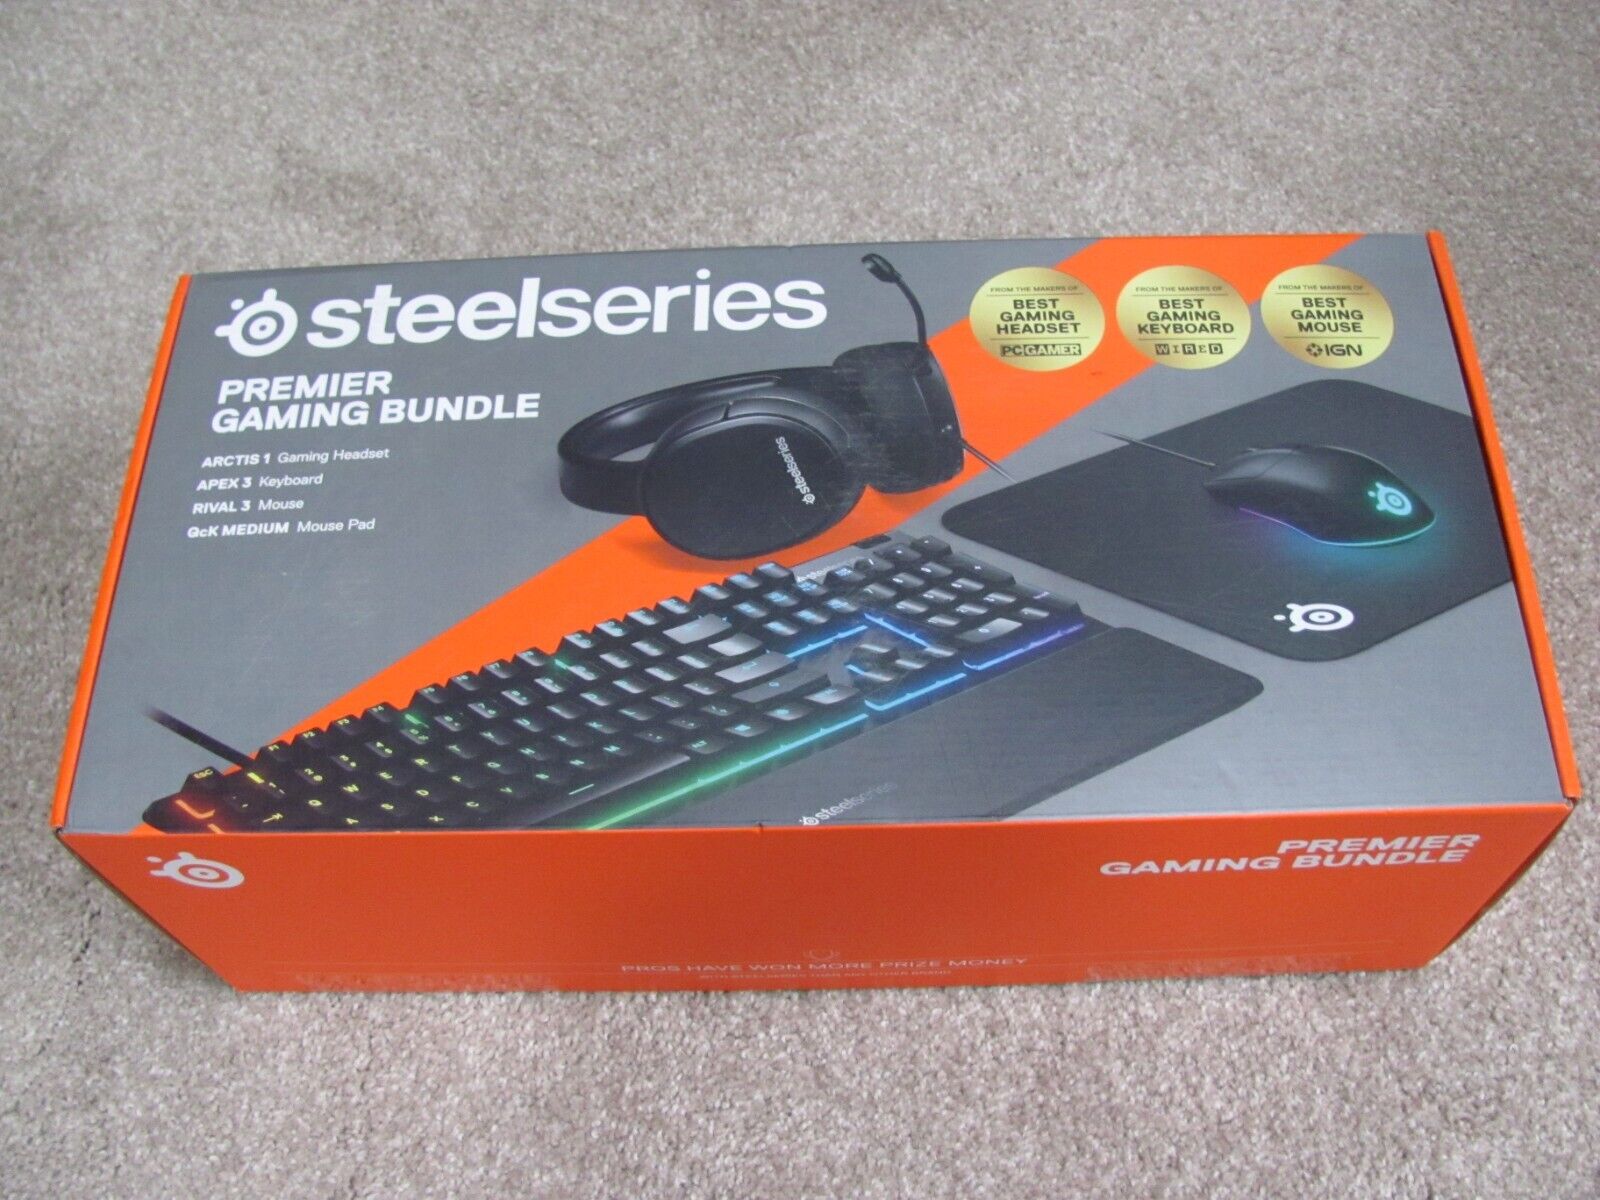 New SteelSeries Premier Gaming Bundle (Headset, Keyboard, Mouse pad & Mouse)